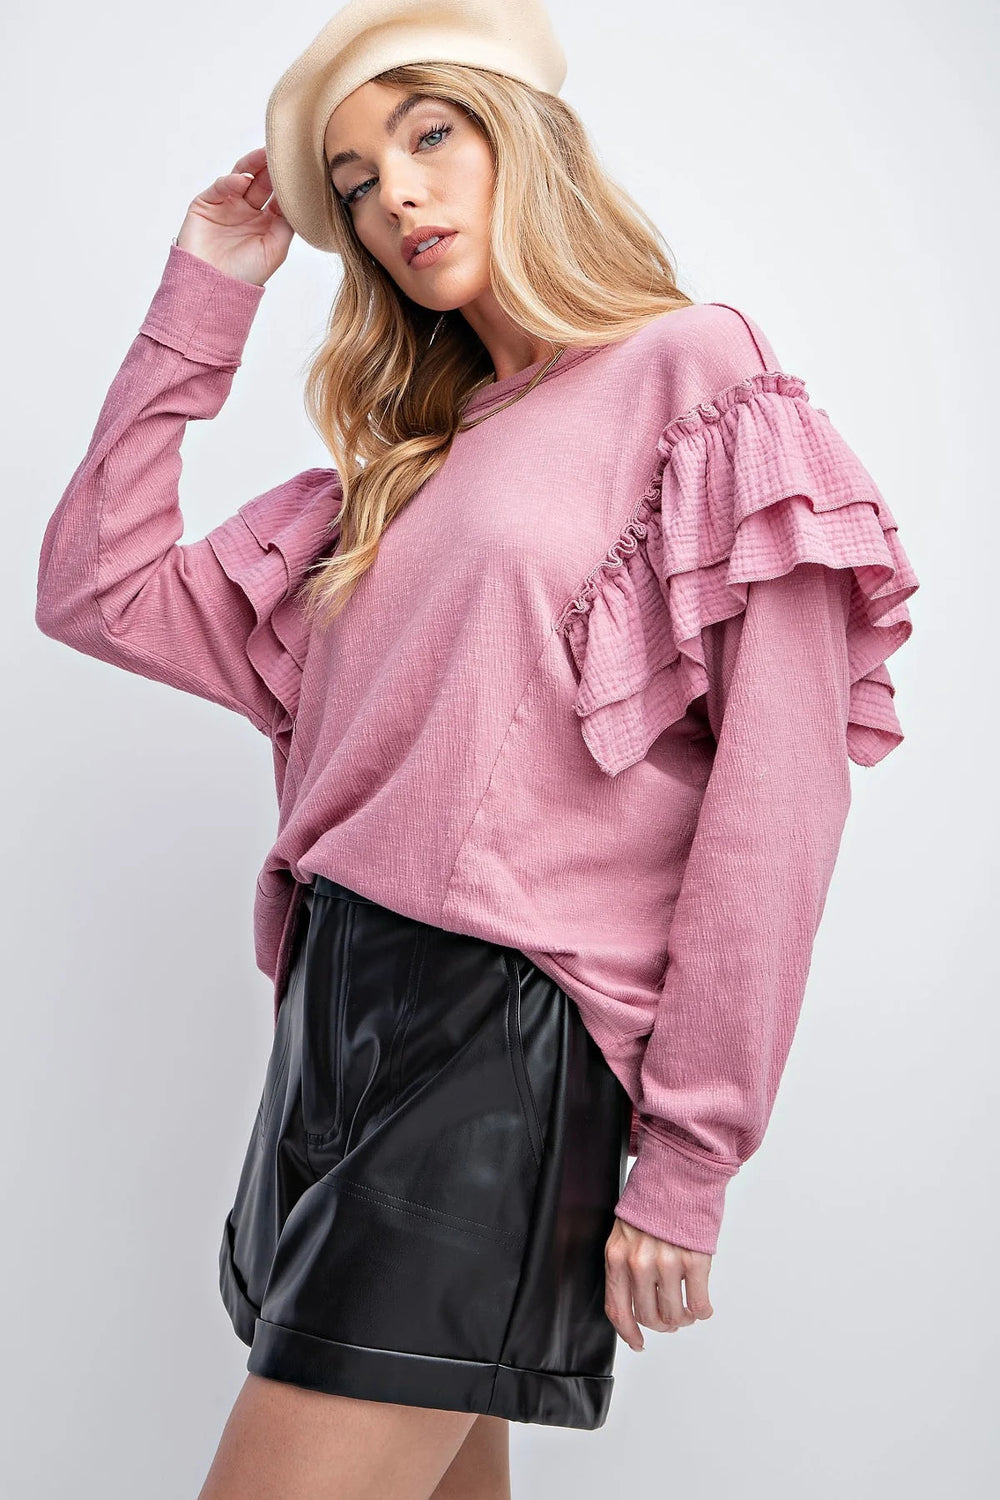 Easel Double Ruffle Sleeves Top Shirts & Tops RYSE Clothing Co.   